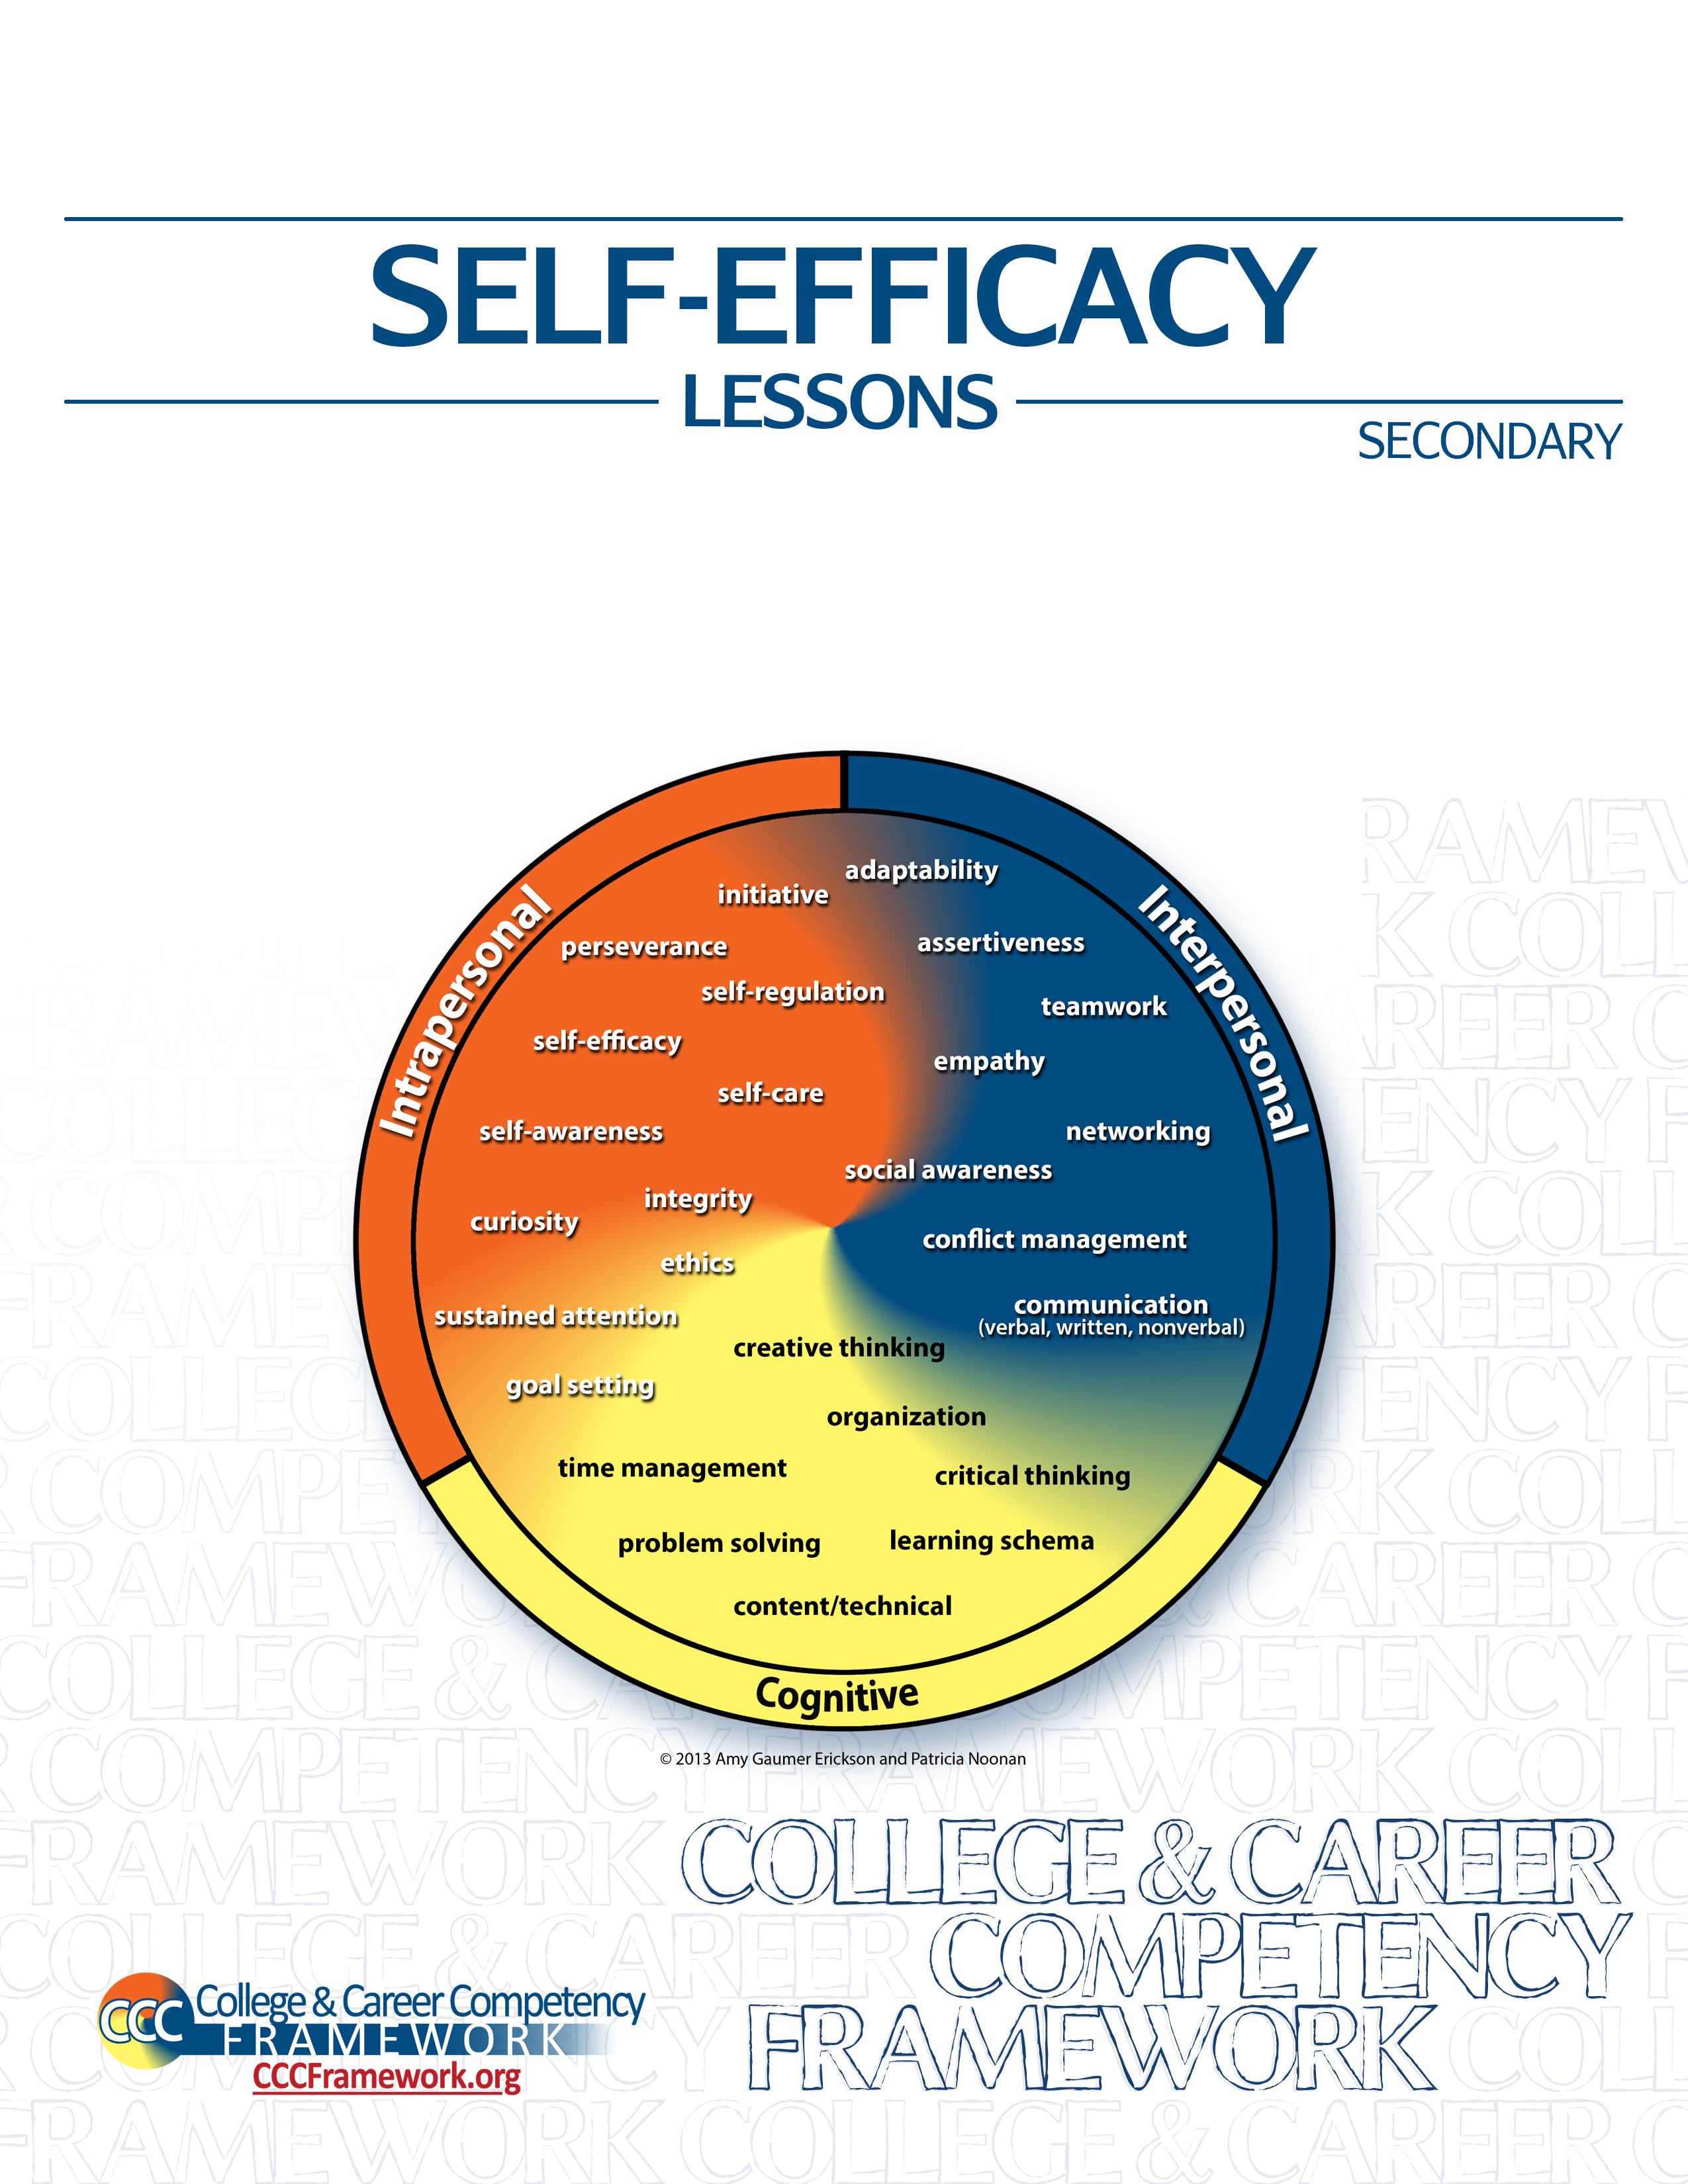 Self-Efficacy Lessons (Secondary) cover.